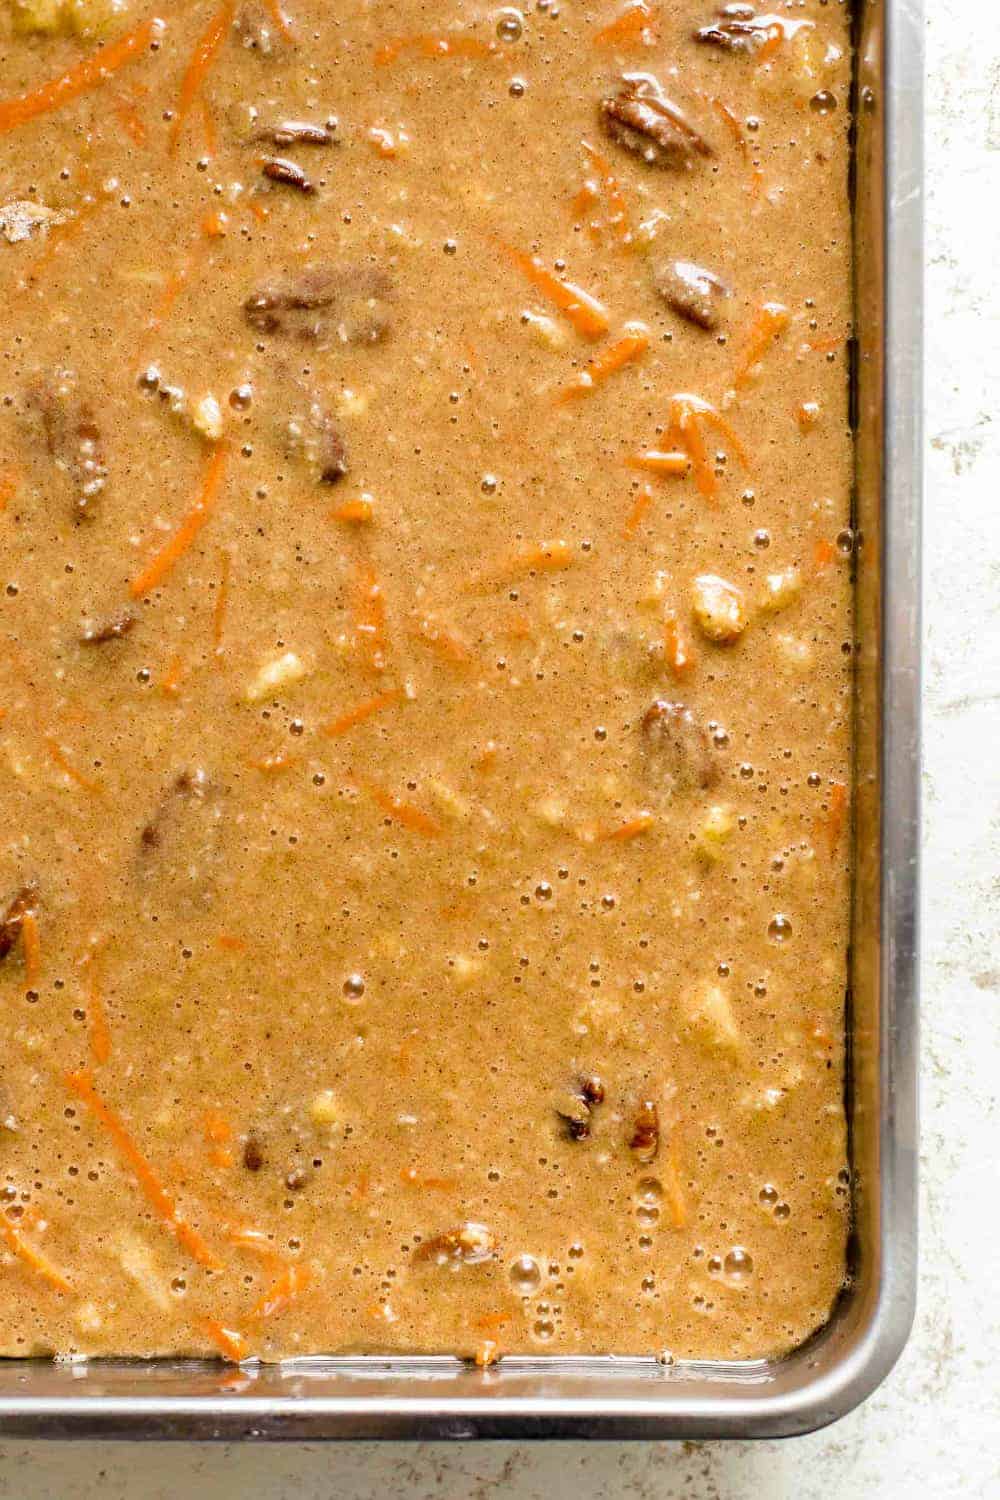 You'll love how easy it is to make the perfect carrot cake with this copycat of J Alexander's Carrot Cake